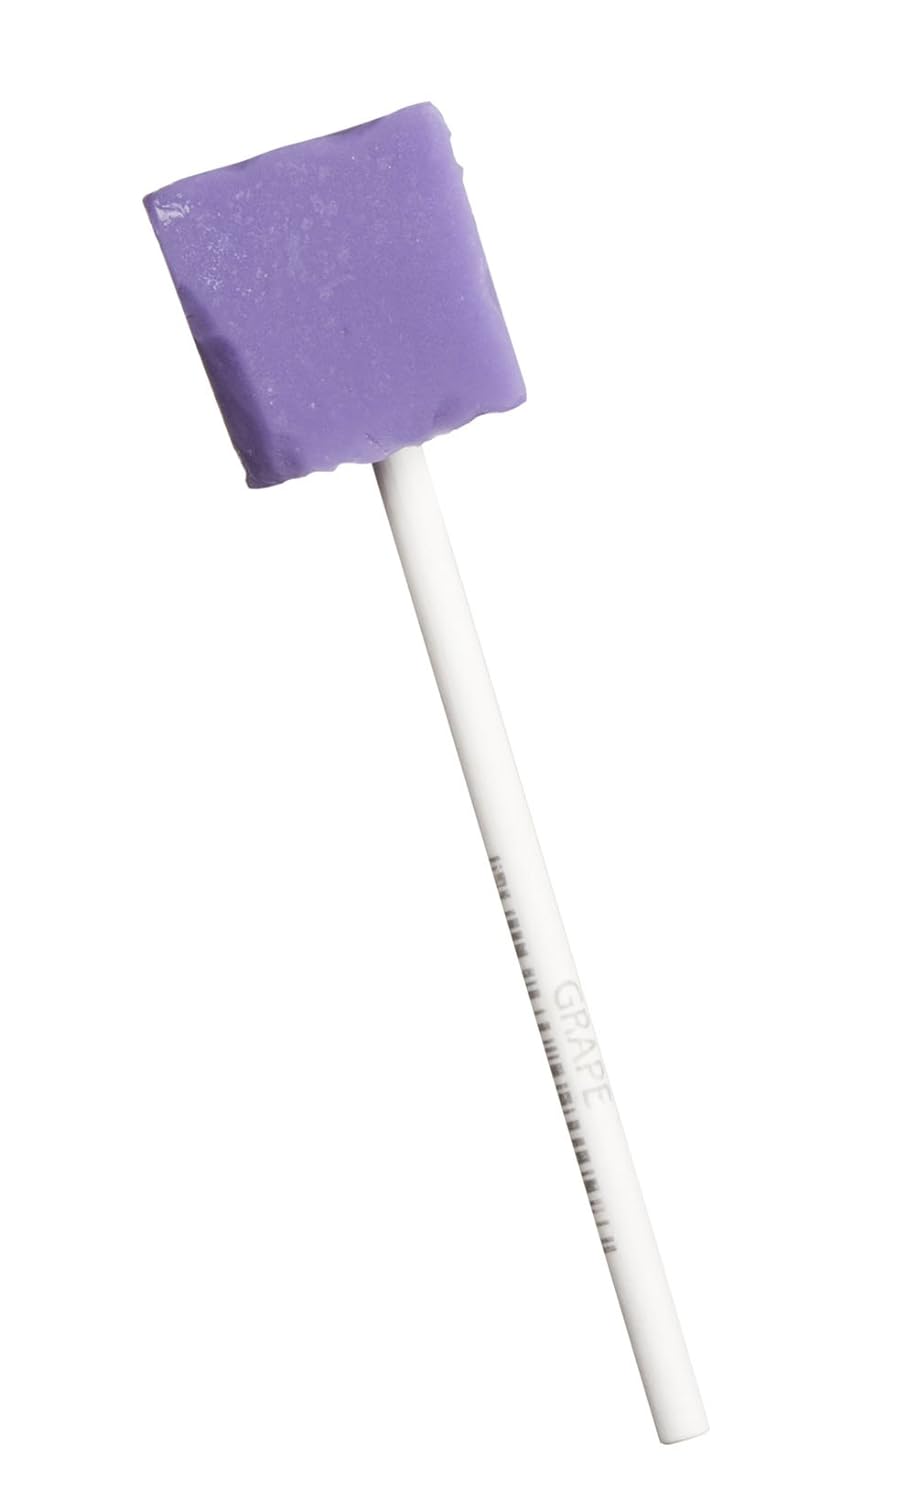  Candy Buffet Store Purple Square Pops - 24 Pack - Grape Flavored - How To Build a Candy Buffet Guide included!